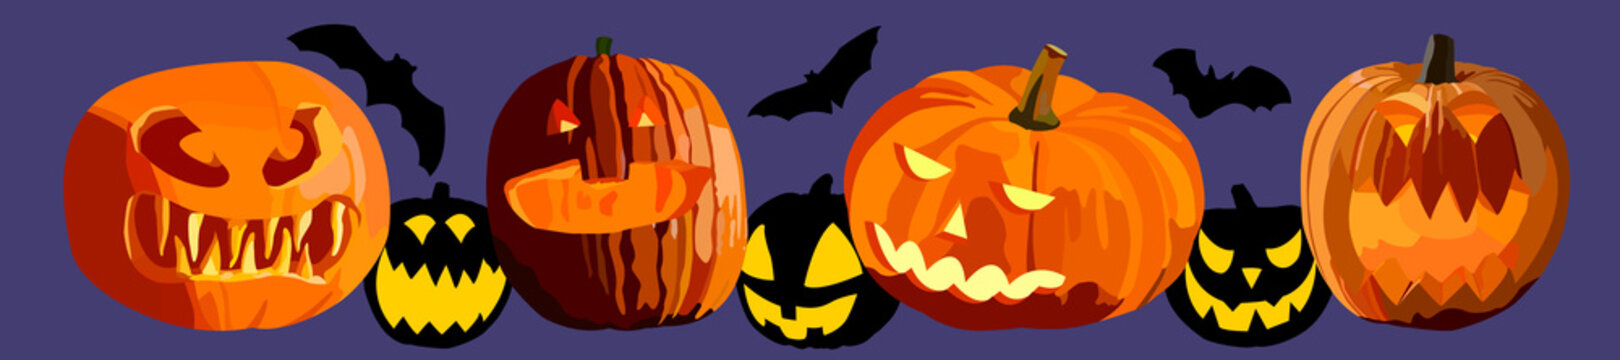 Images for Halloween with three-dimensional pumpkins and their silhouettes and bats .